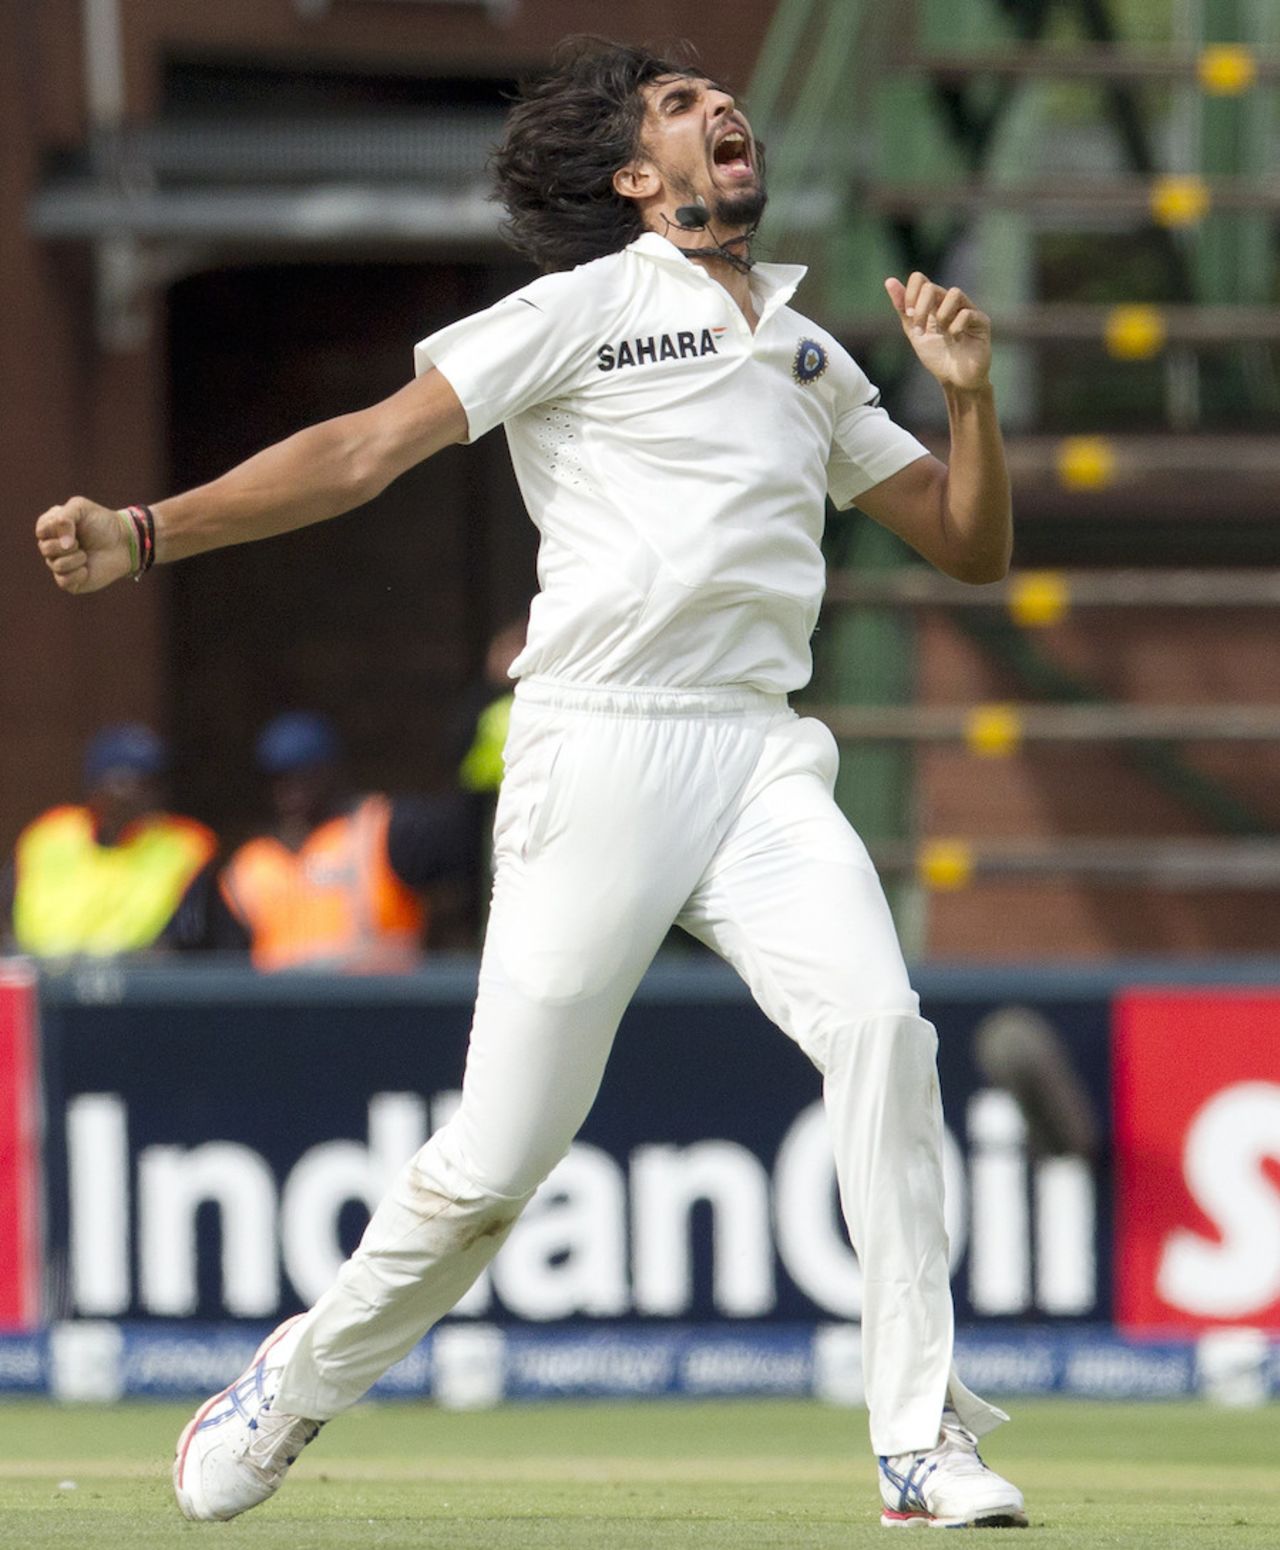 Ishant Sharma is elated after picking up a wicket, South Africa v India, 1st Test, Johannesburg, 2nd day, December 19, 2013